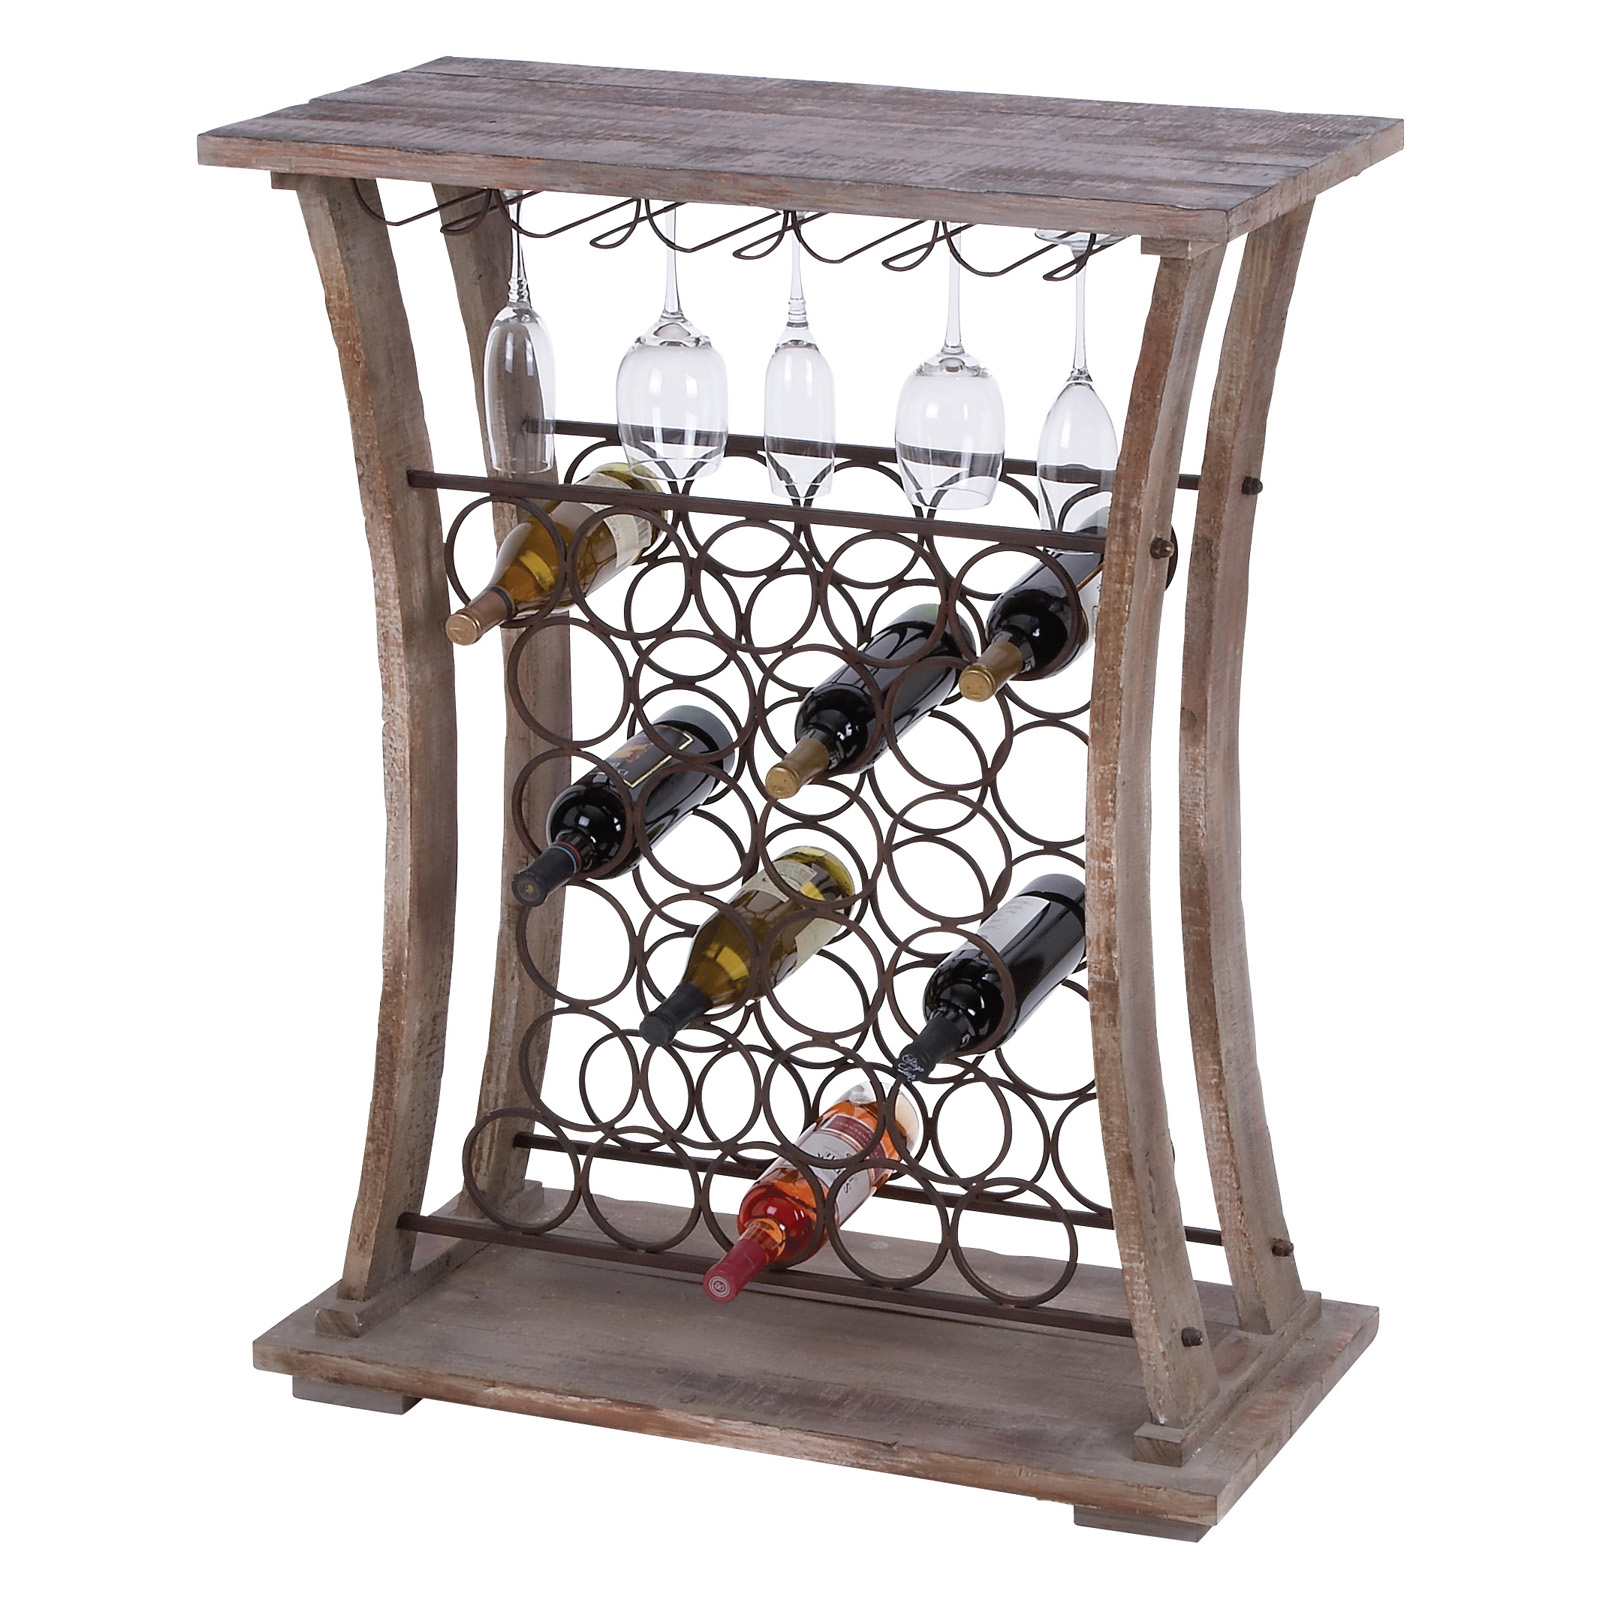 Floor wine racks they are more versatile than you think